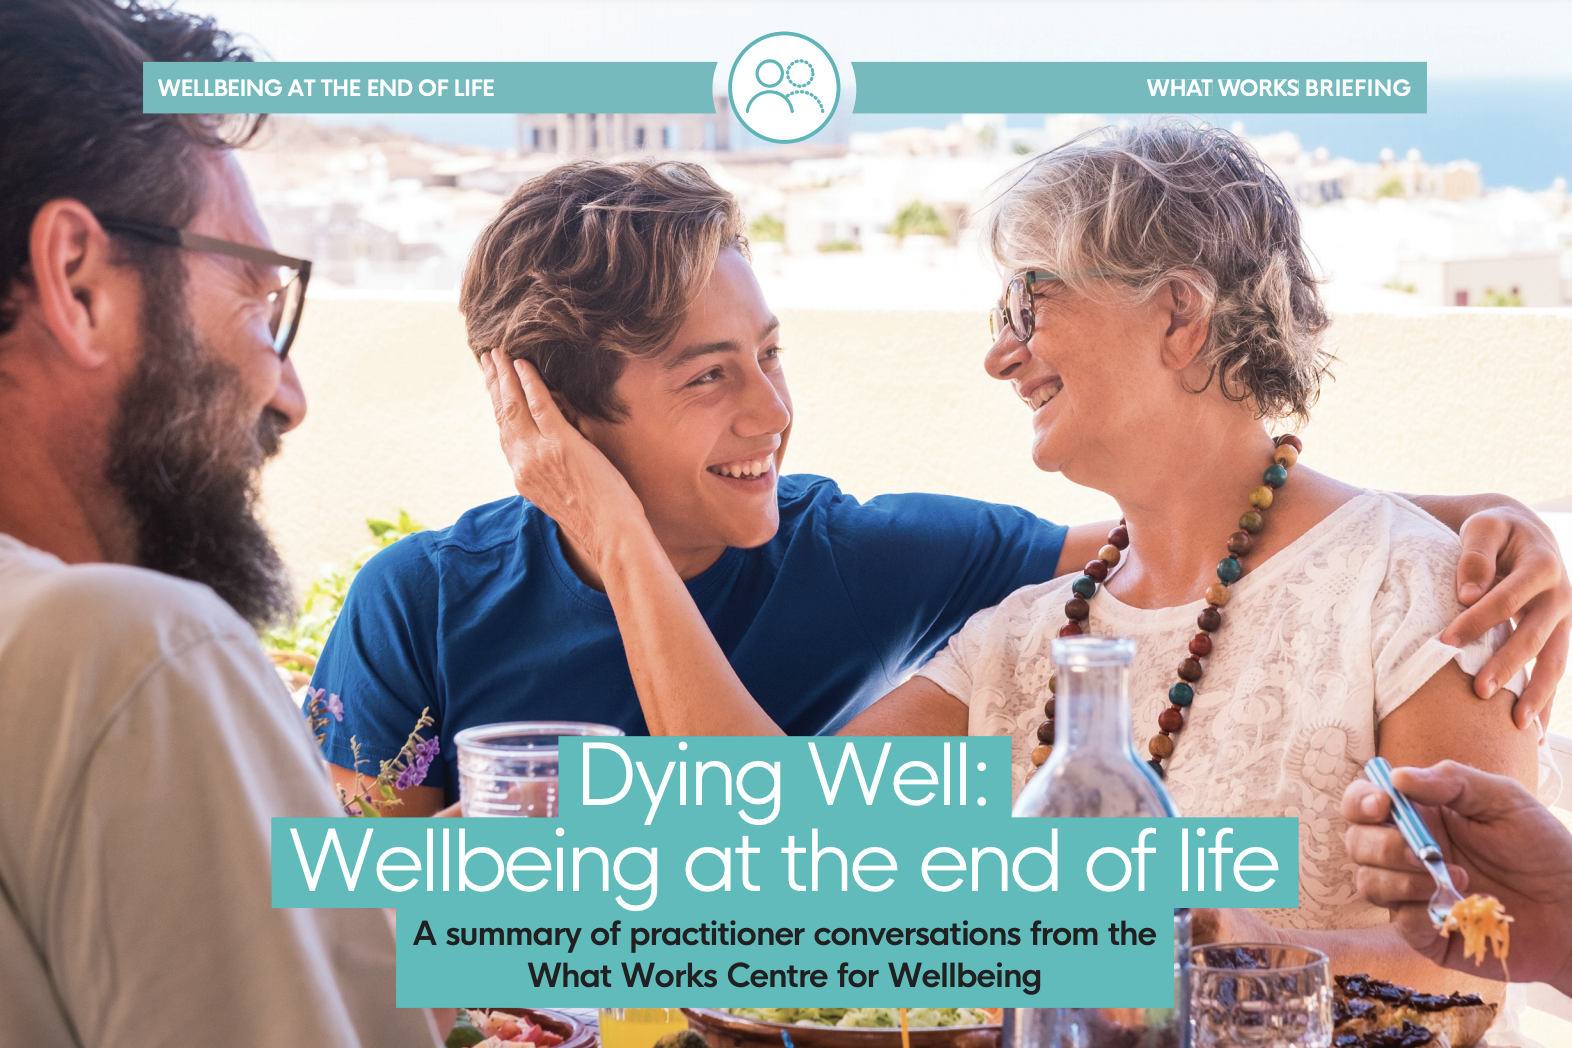 Dying Well: Wellbeing at the end of life